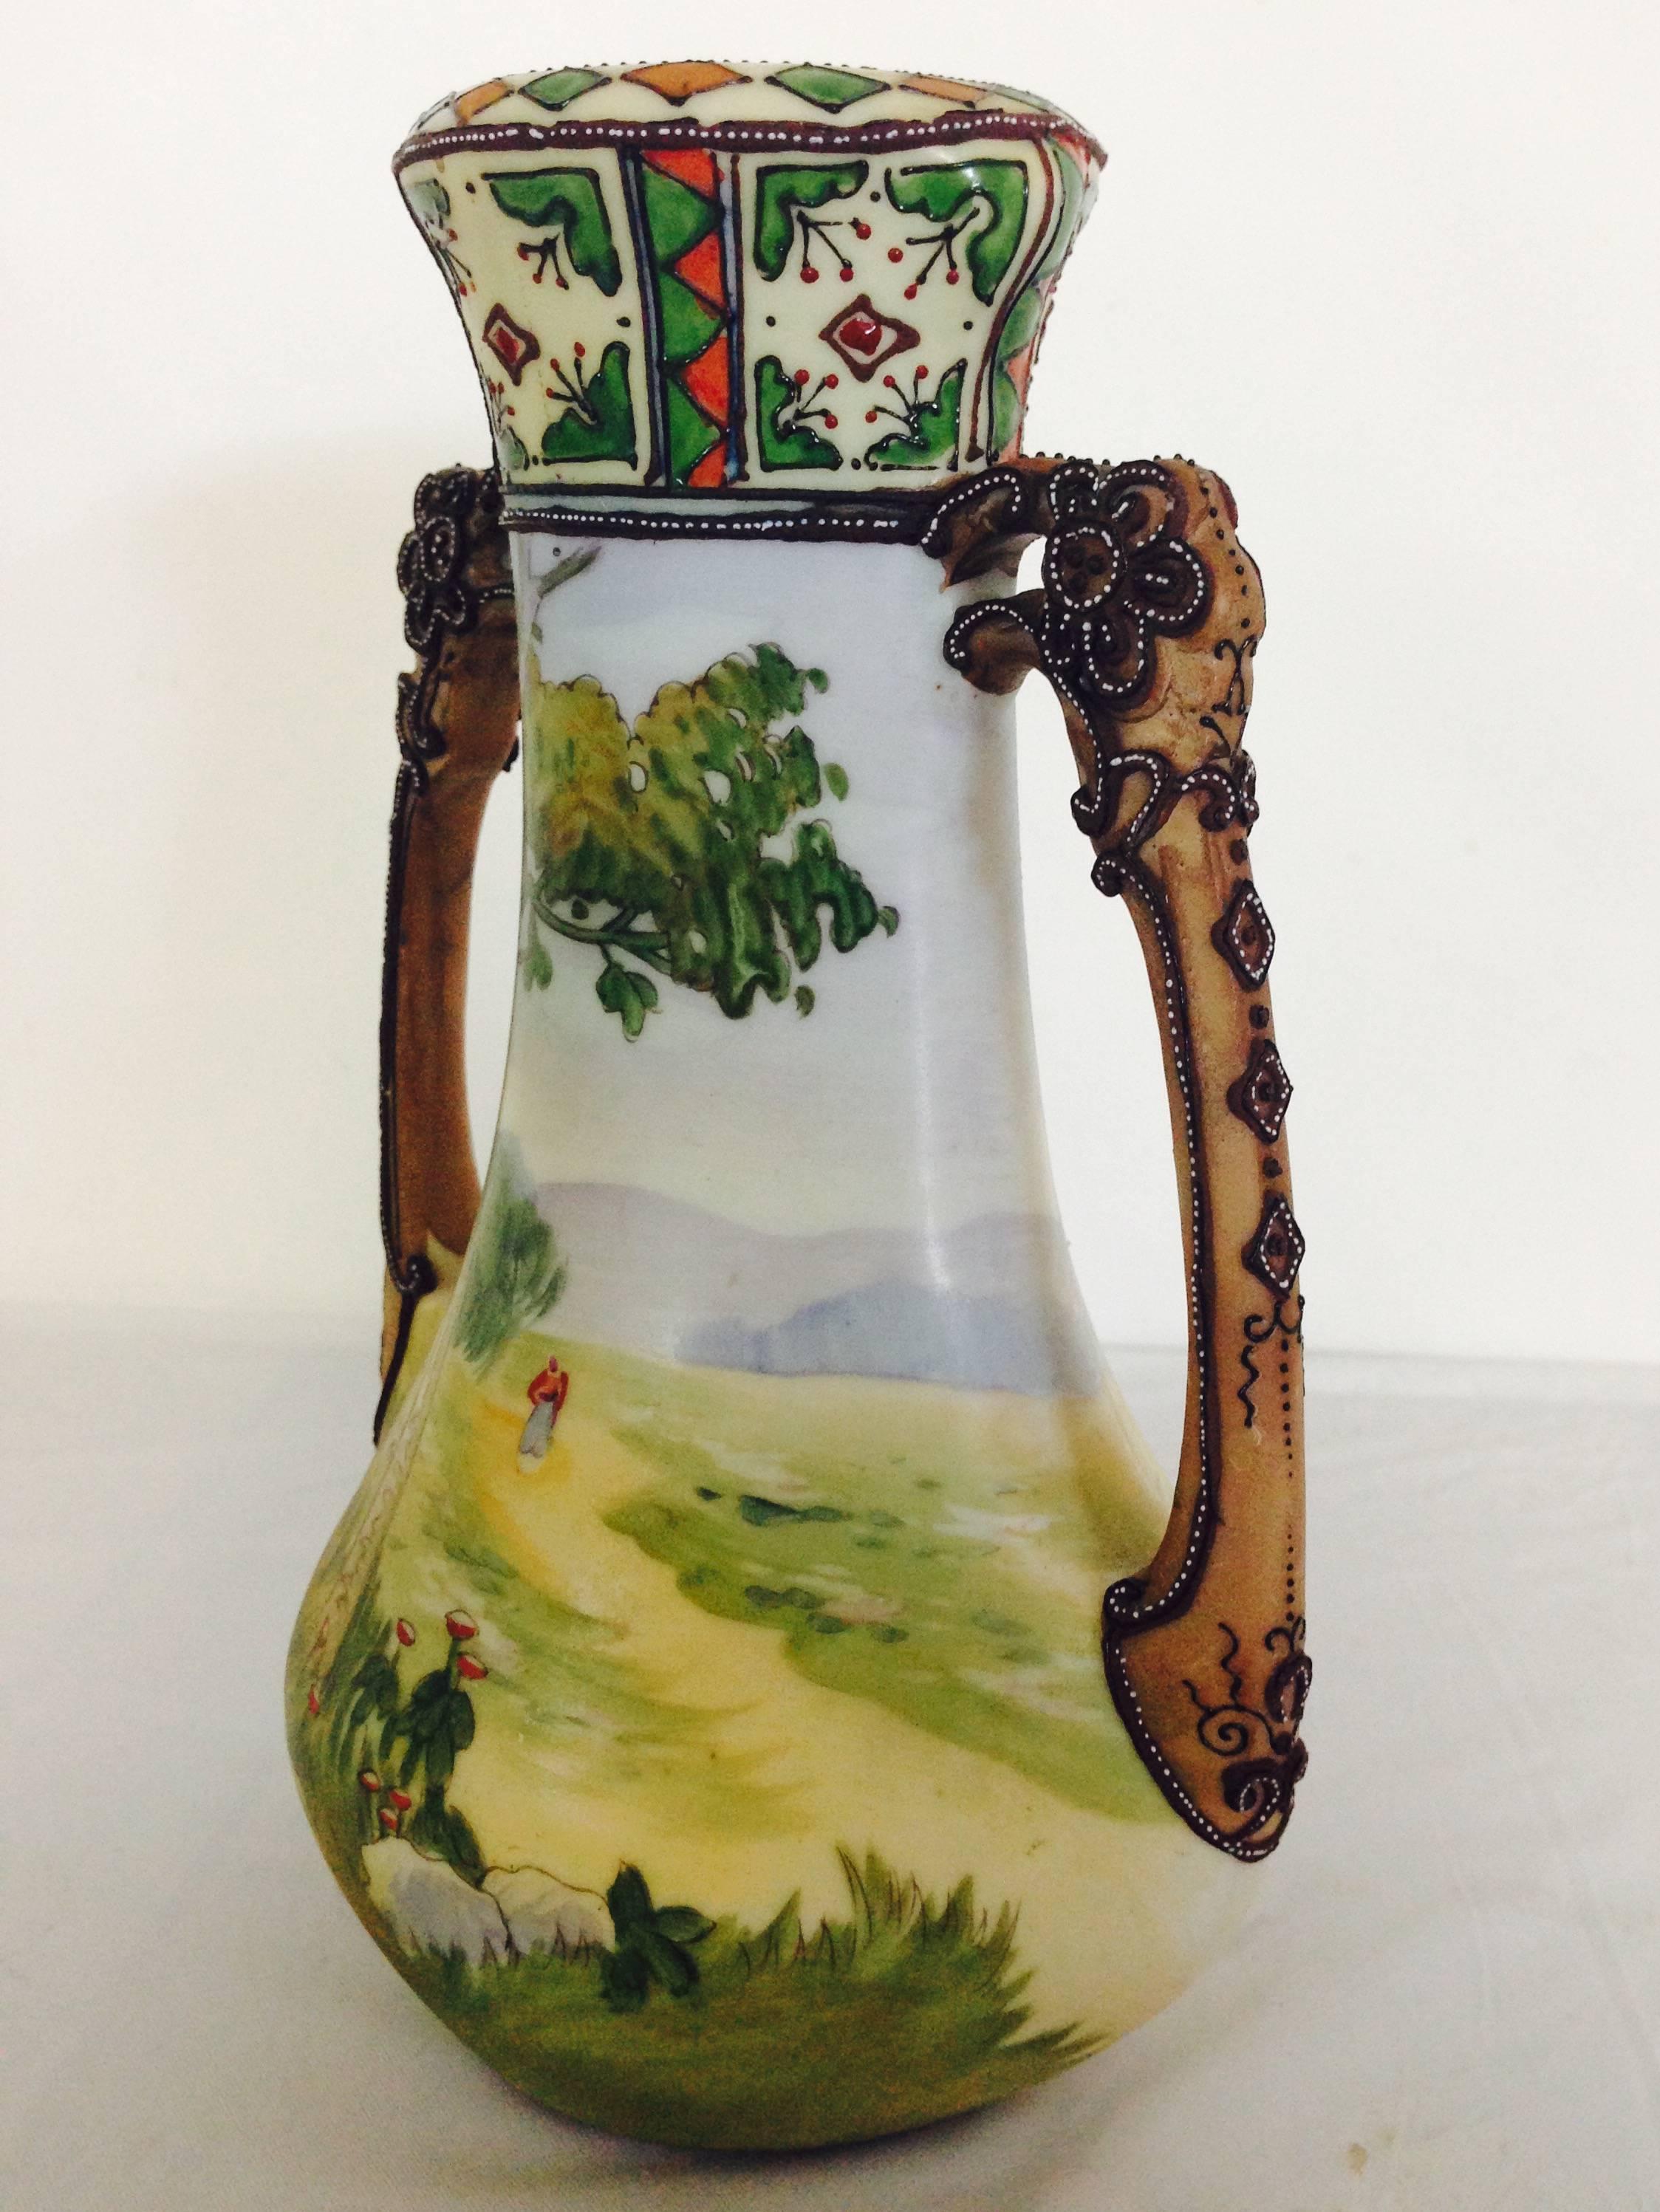 Antique and very rare Art Nouveau design, double dragon handle pasture and mountain scene vase. Heavy raised dot moriage detail on handles and neck. Signed on the underside with M for Morimura Bros. and green wreath.